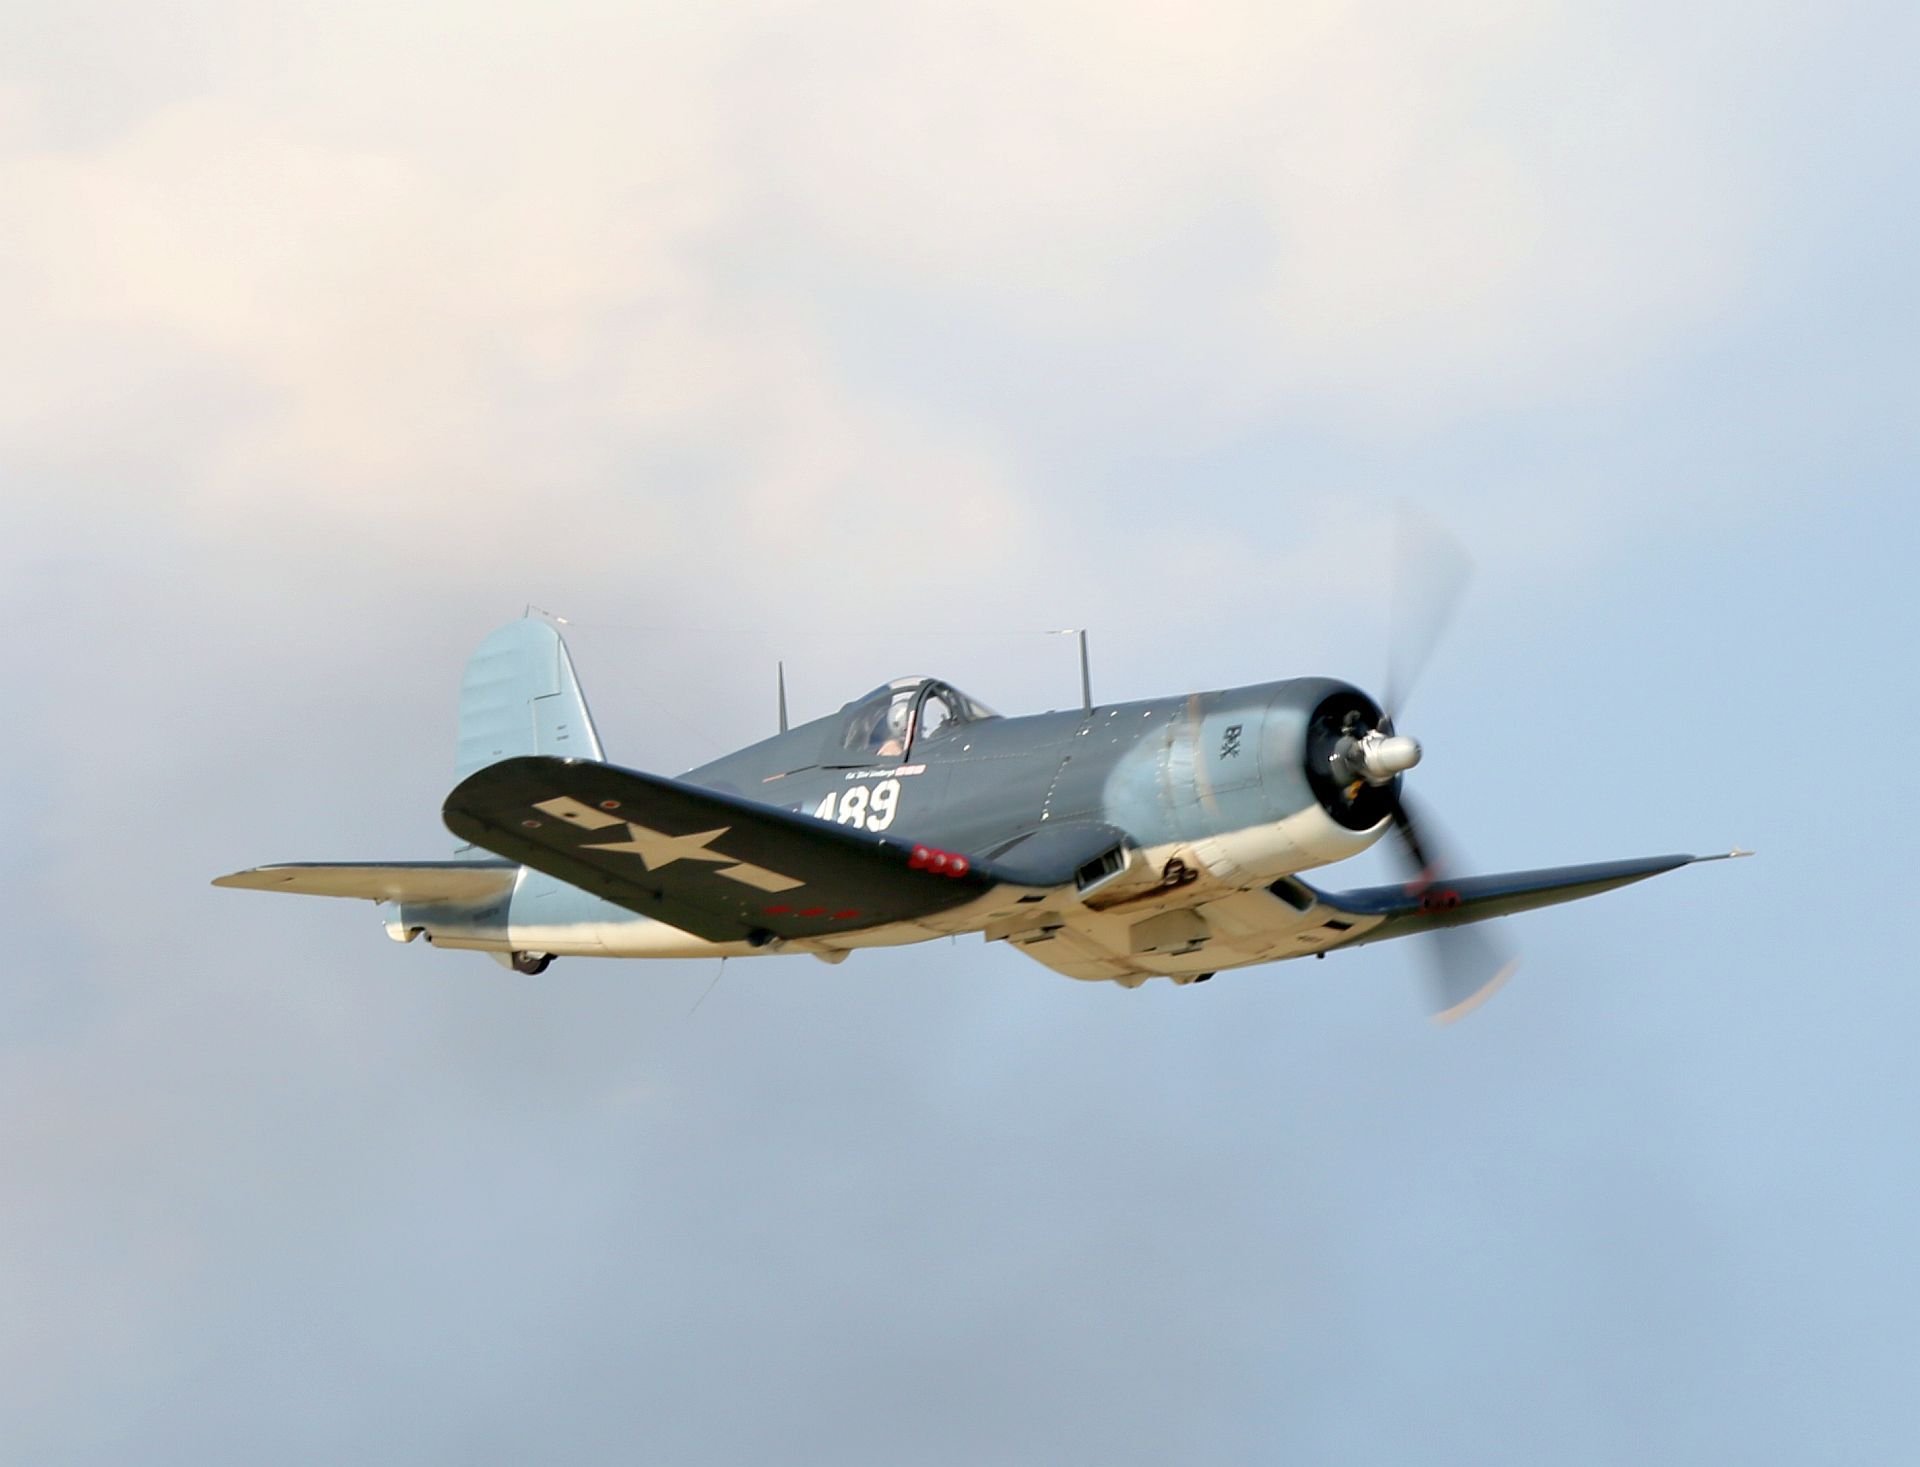 A Vought F4U Corsair flying in the sky.